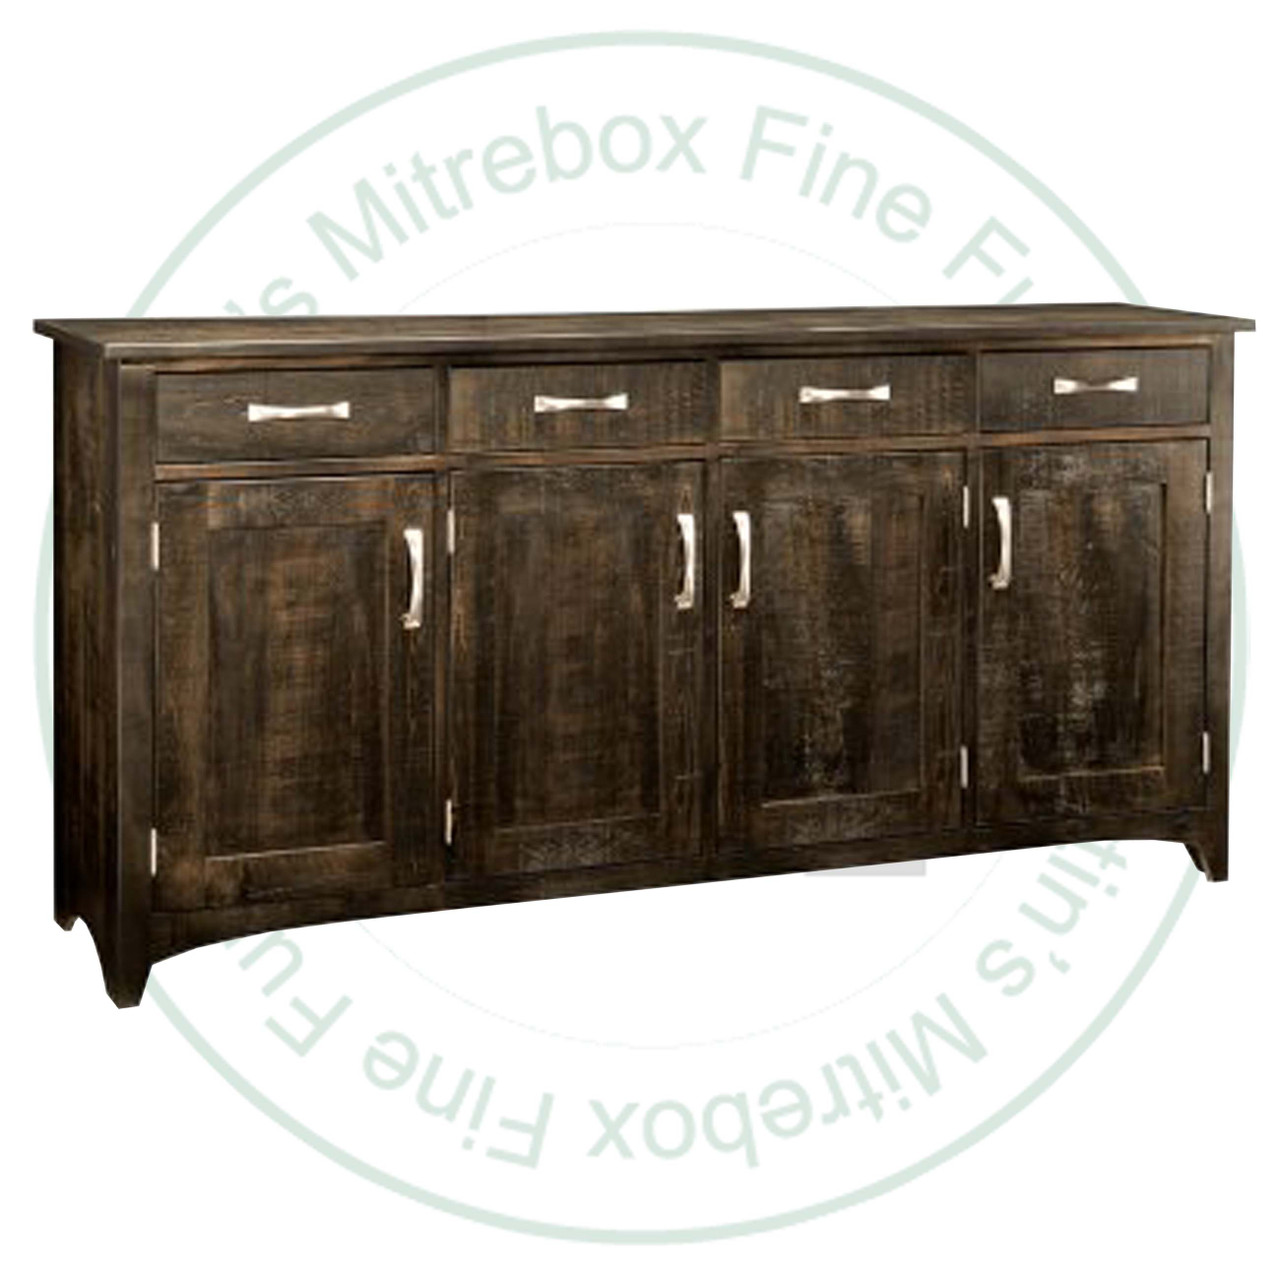 Oak Bancroft Sideboard 19''D x 77''W x 39.5''H With 3 Wood Doors And 4 Drawers